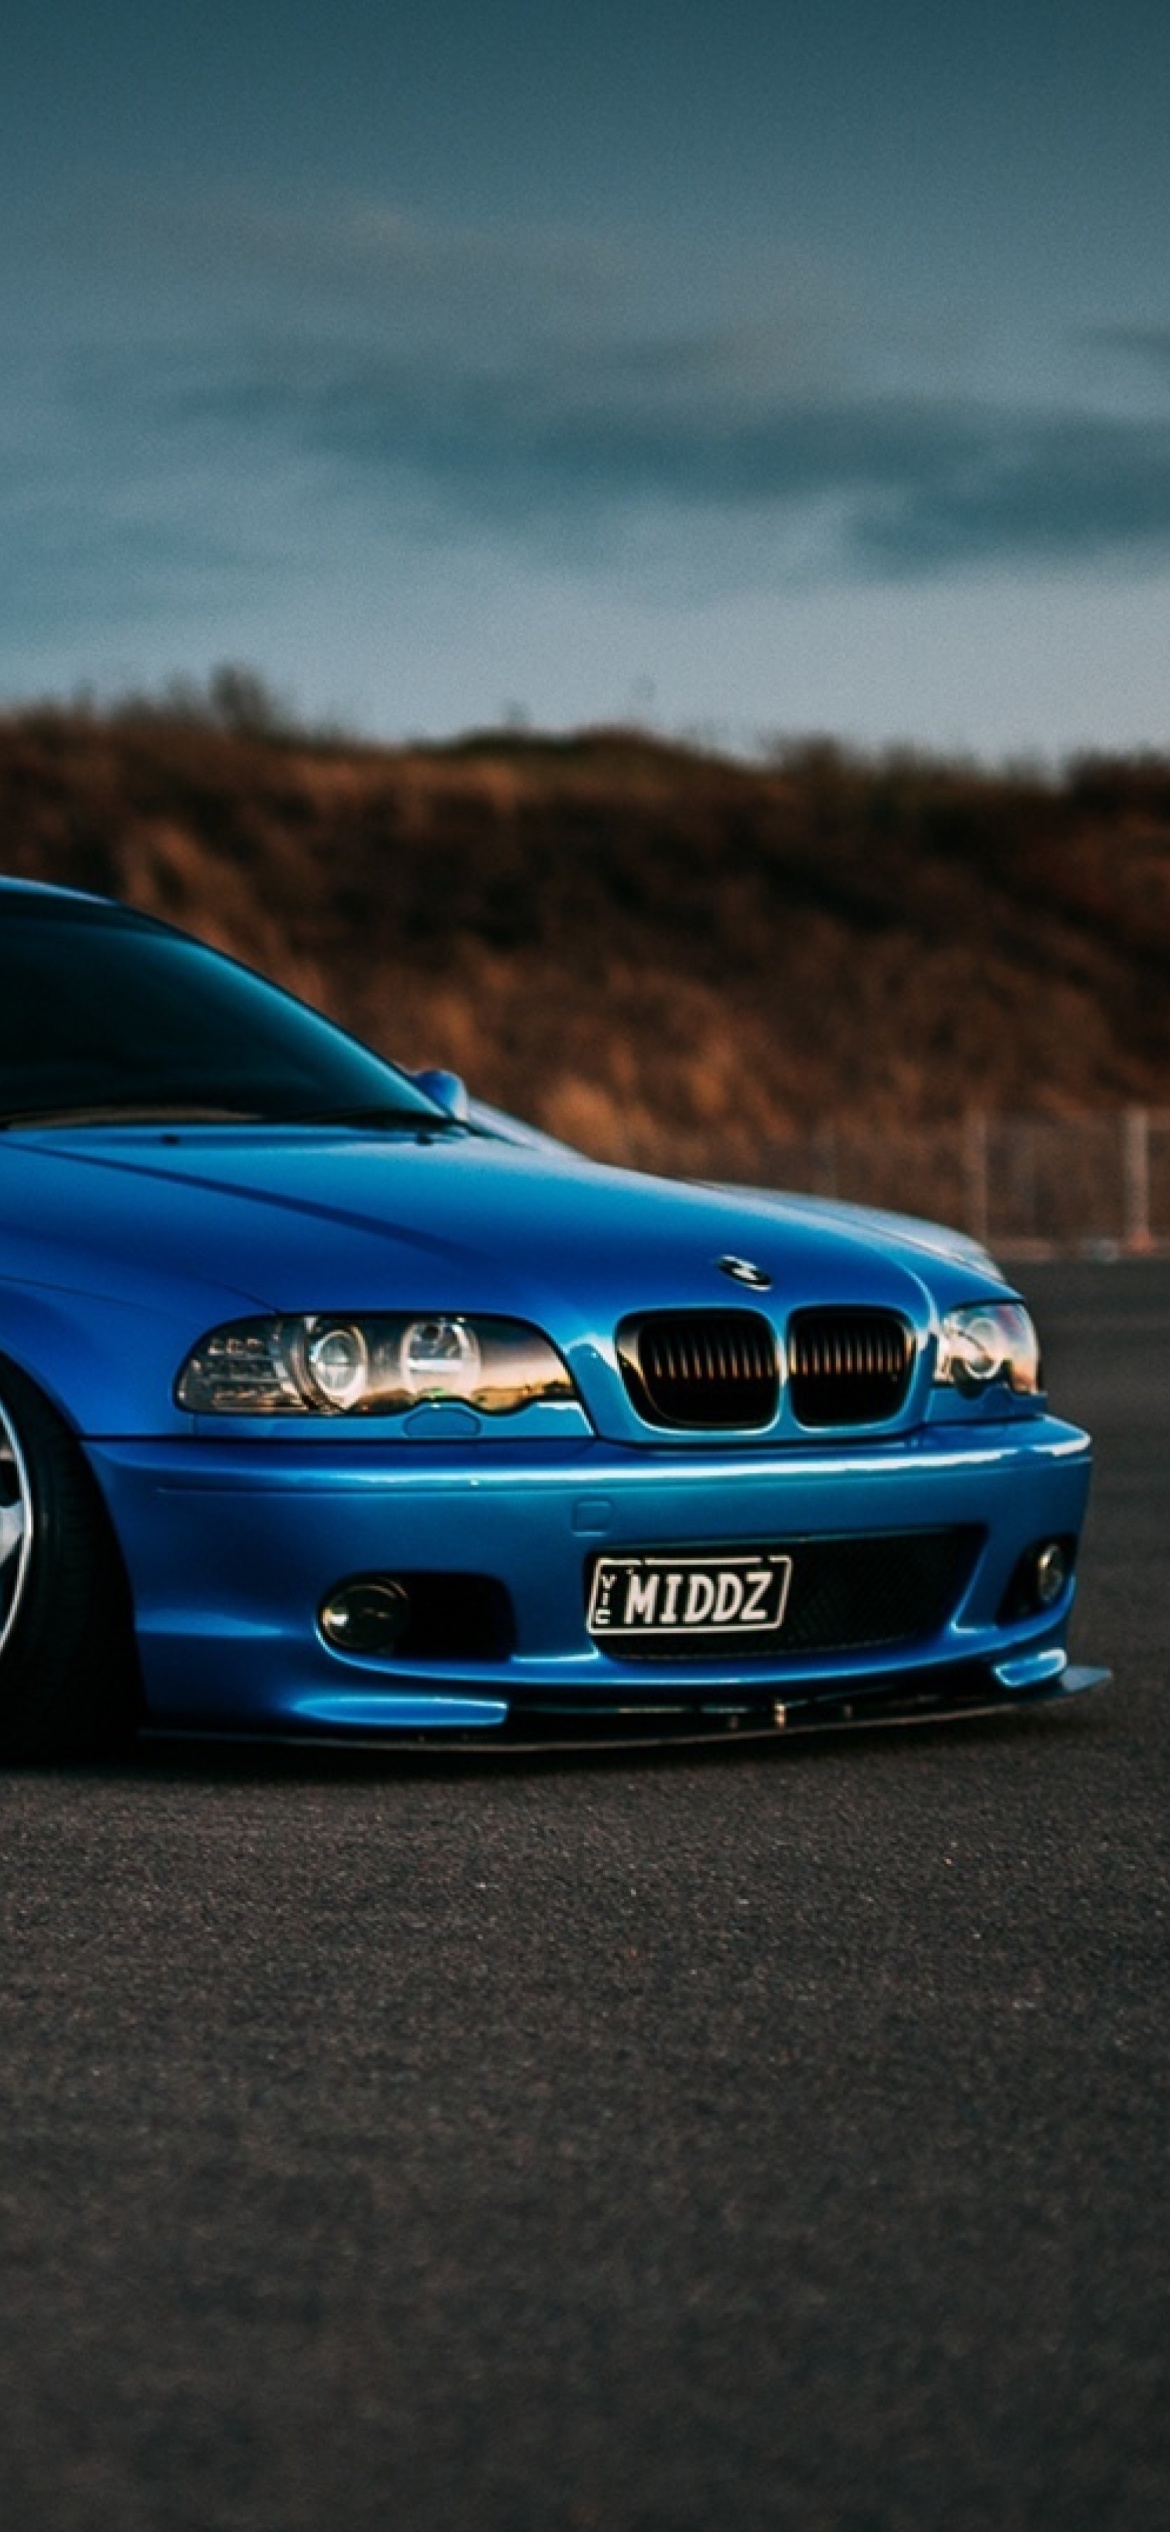 BMW M3 E46 Wallpaper for iPhone 12 Pro